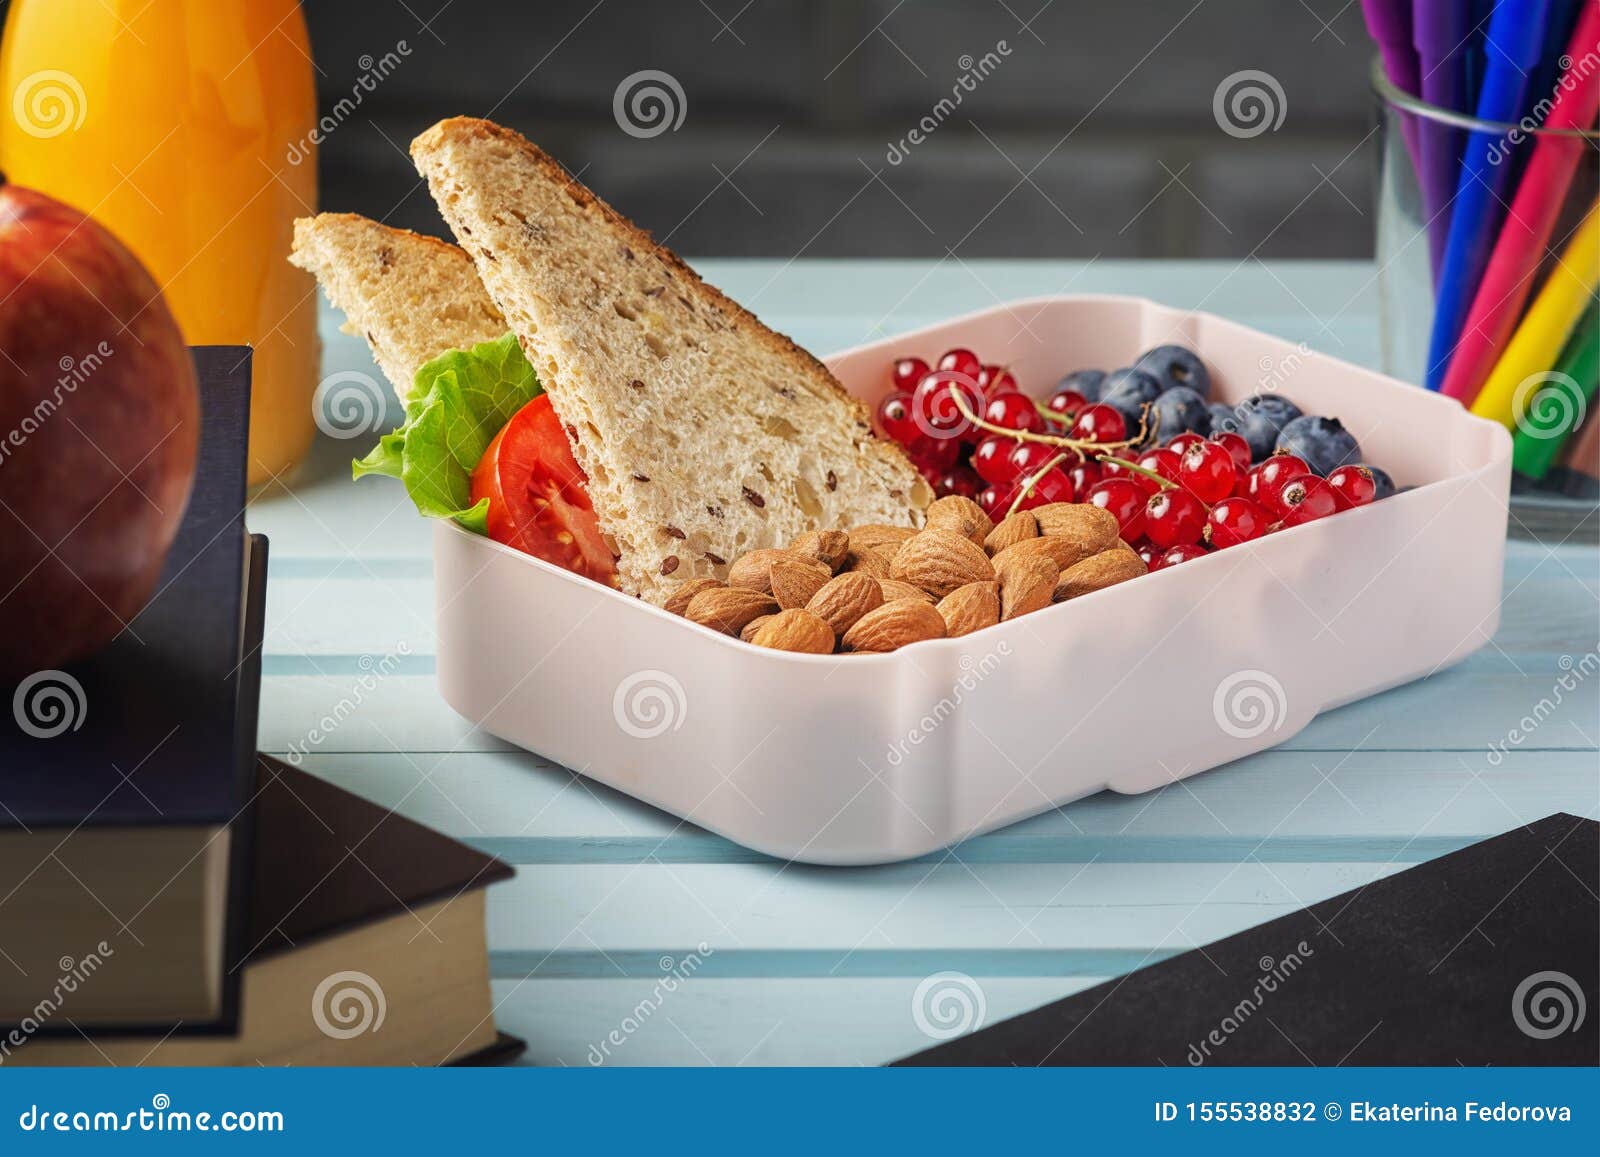 school lunch in a box, berries, nuts and a sandwich. almonds, red currants and blueberries for a child s snack. healthy